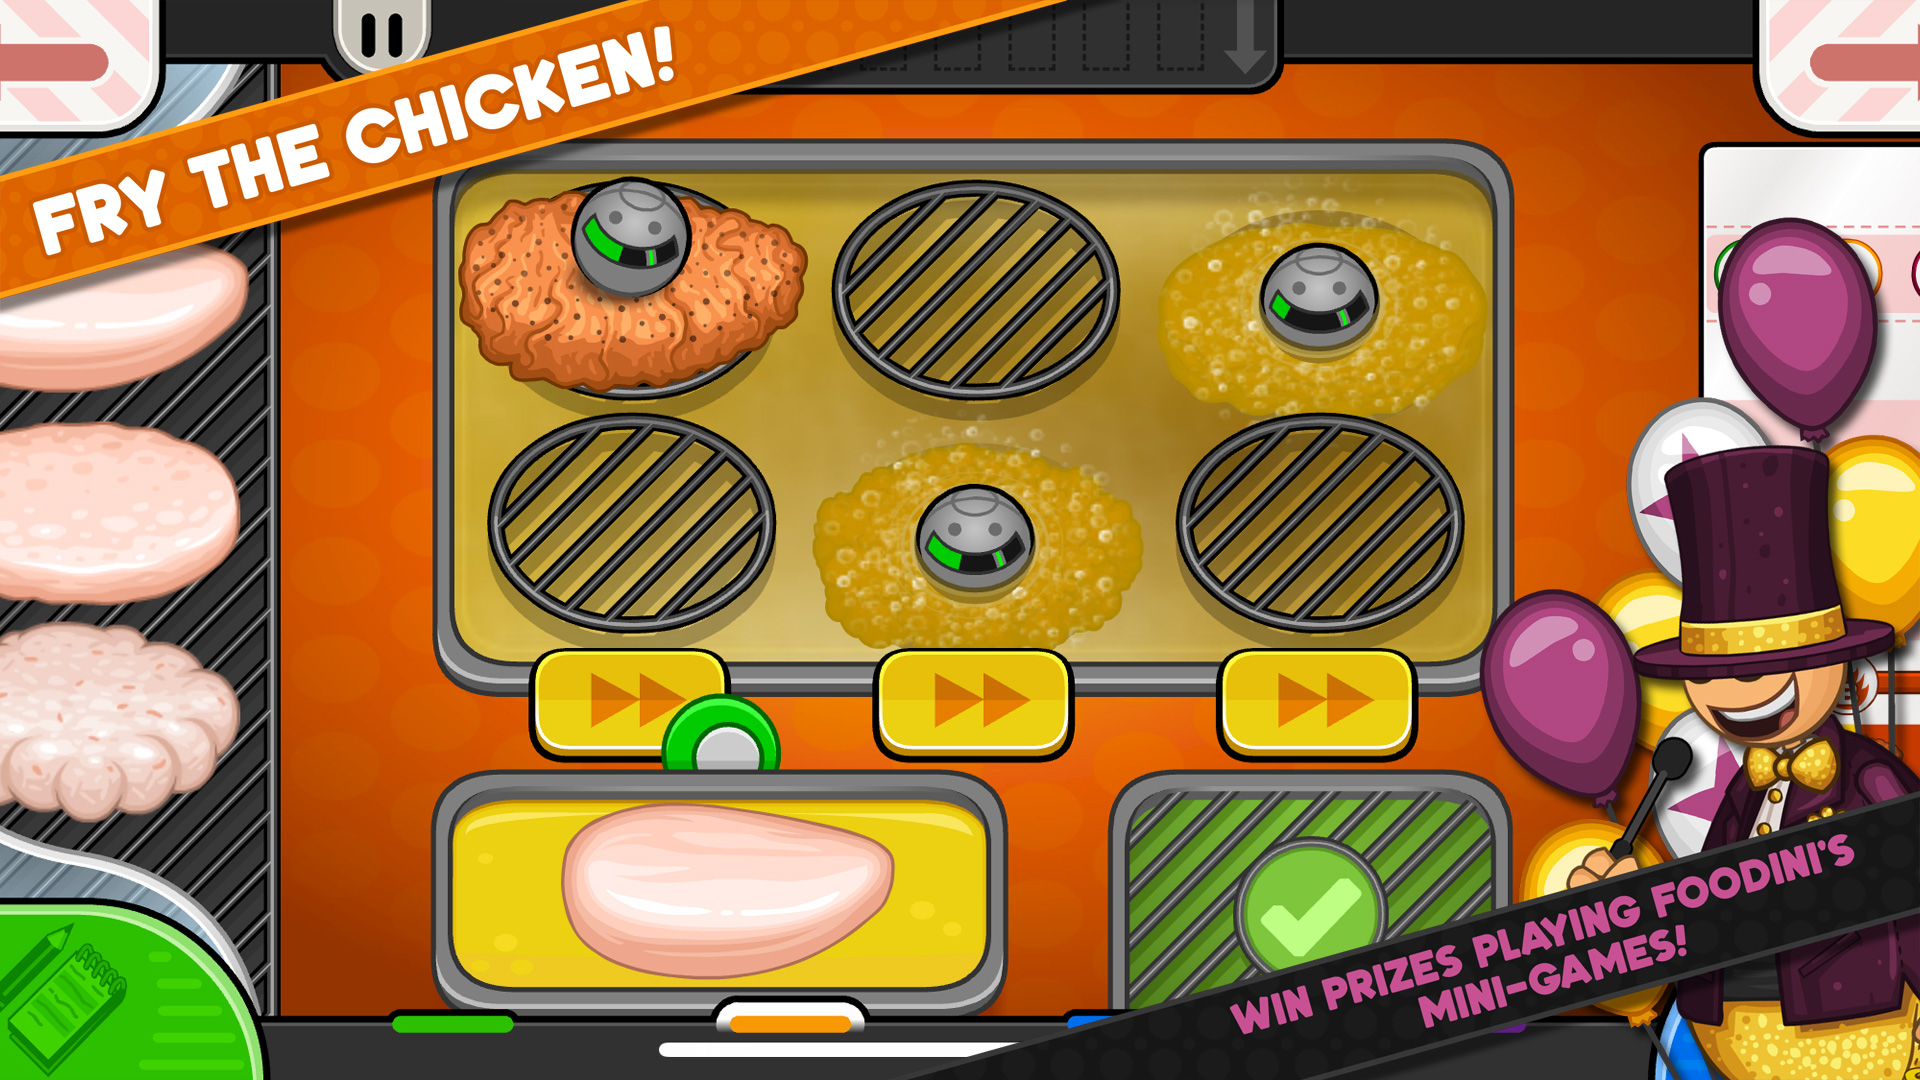 Papa's Bakeria game APK (Android App) - Free Download